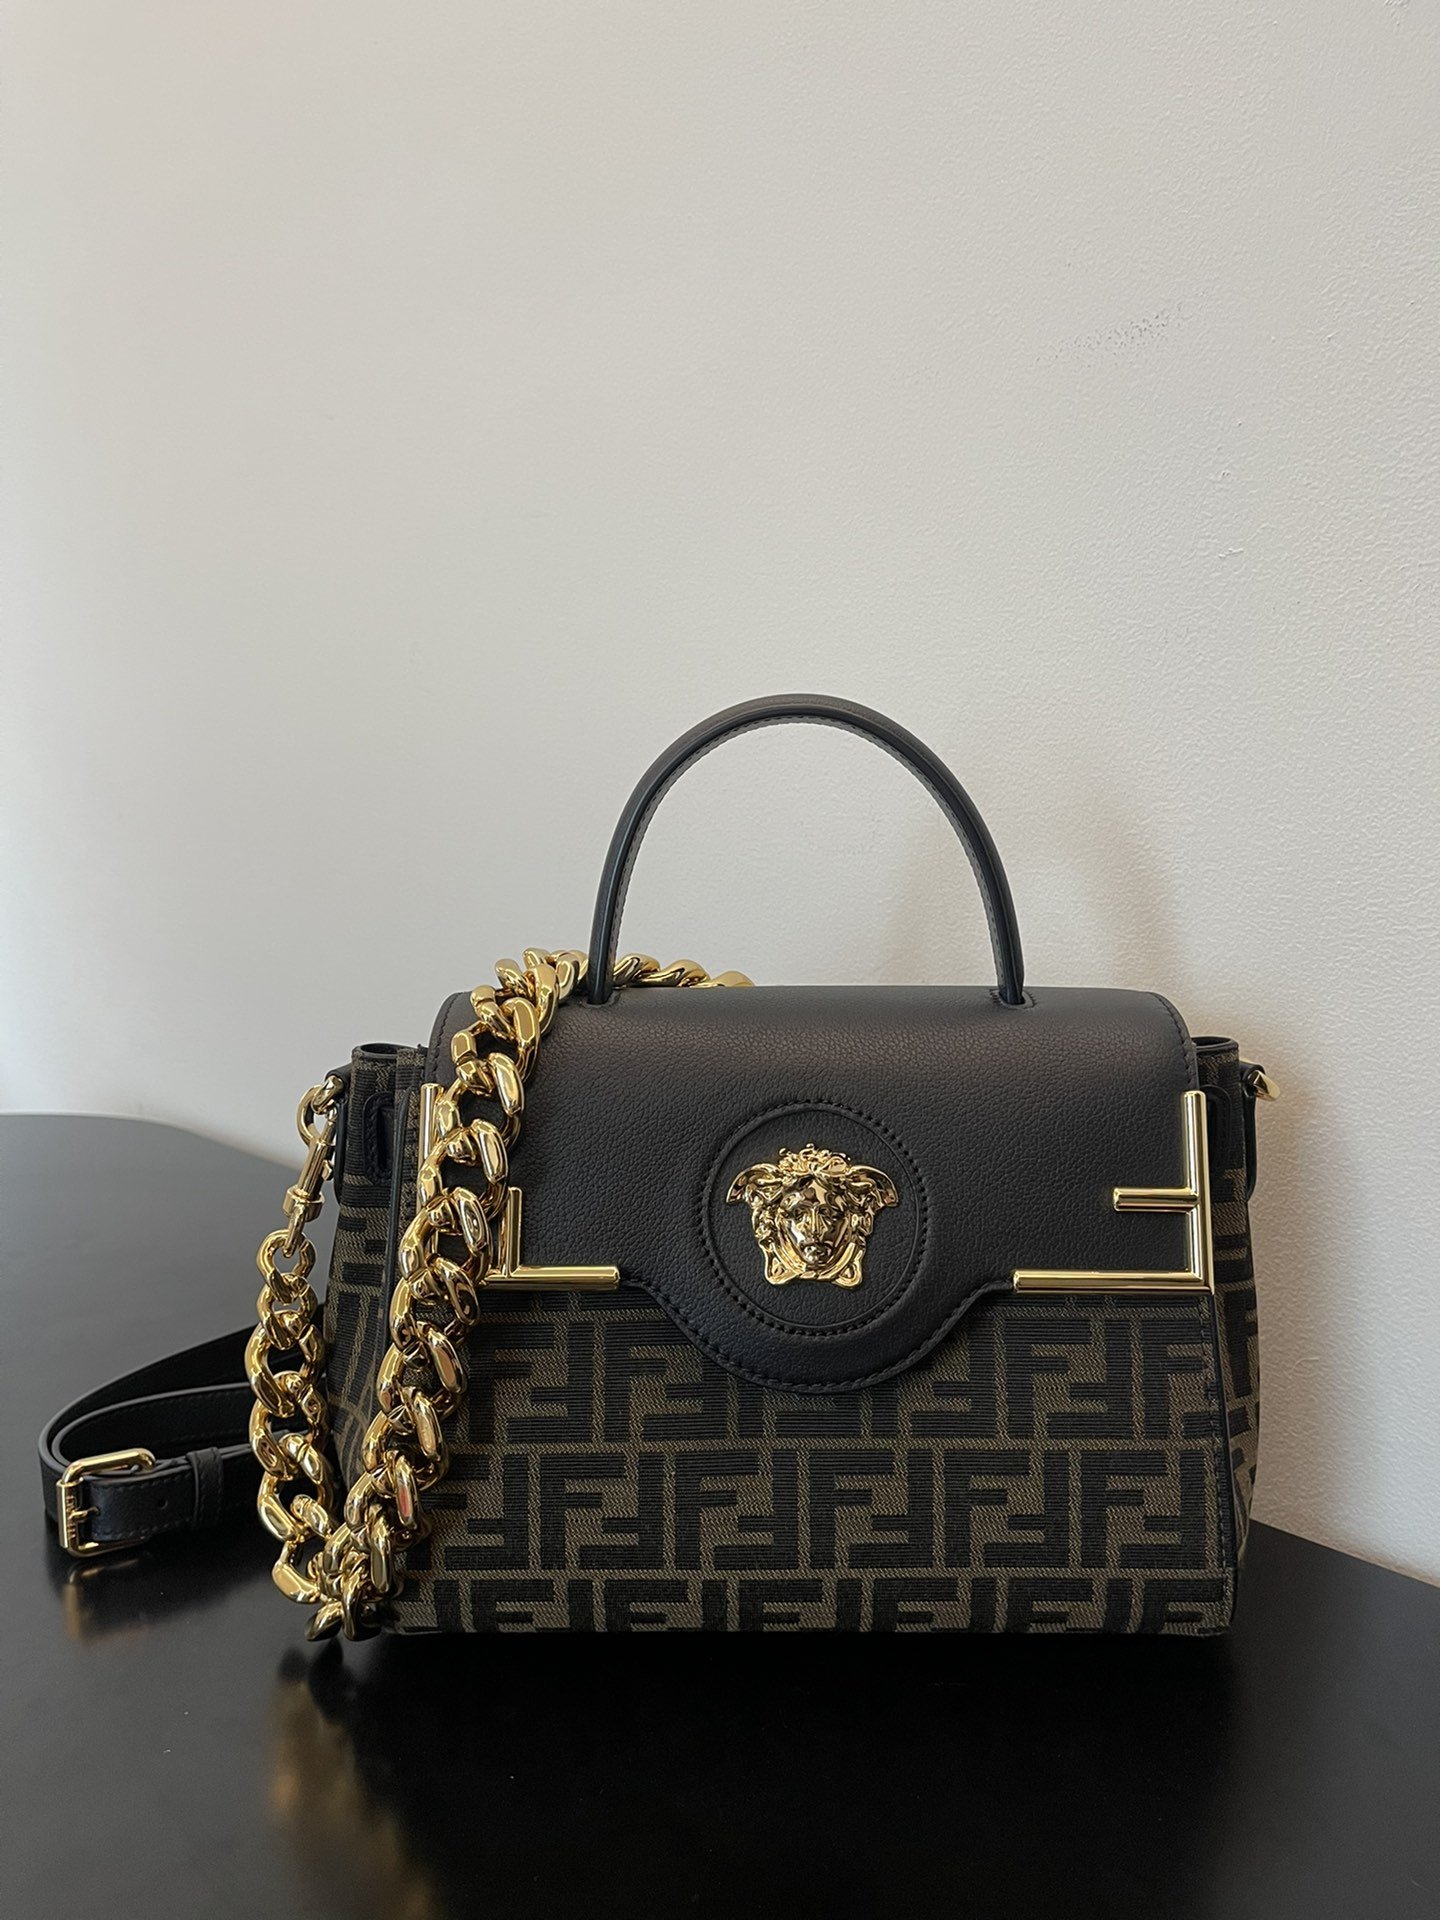 A bag of collection Versace by Fendi 25 cm